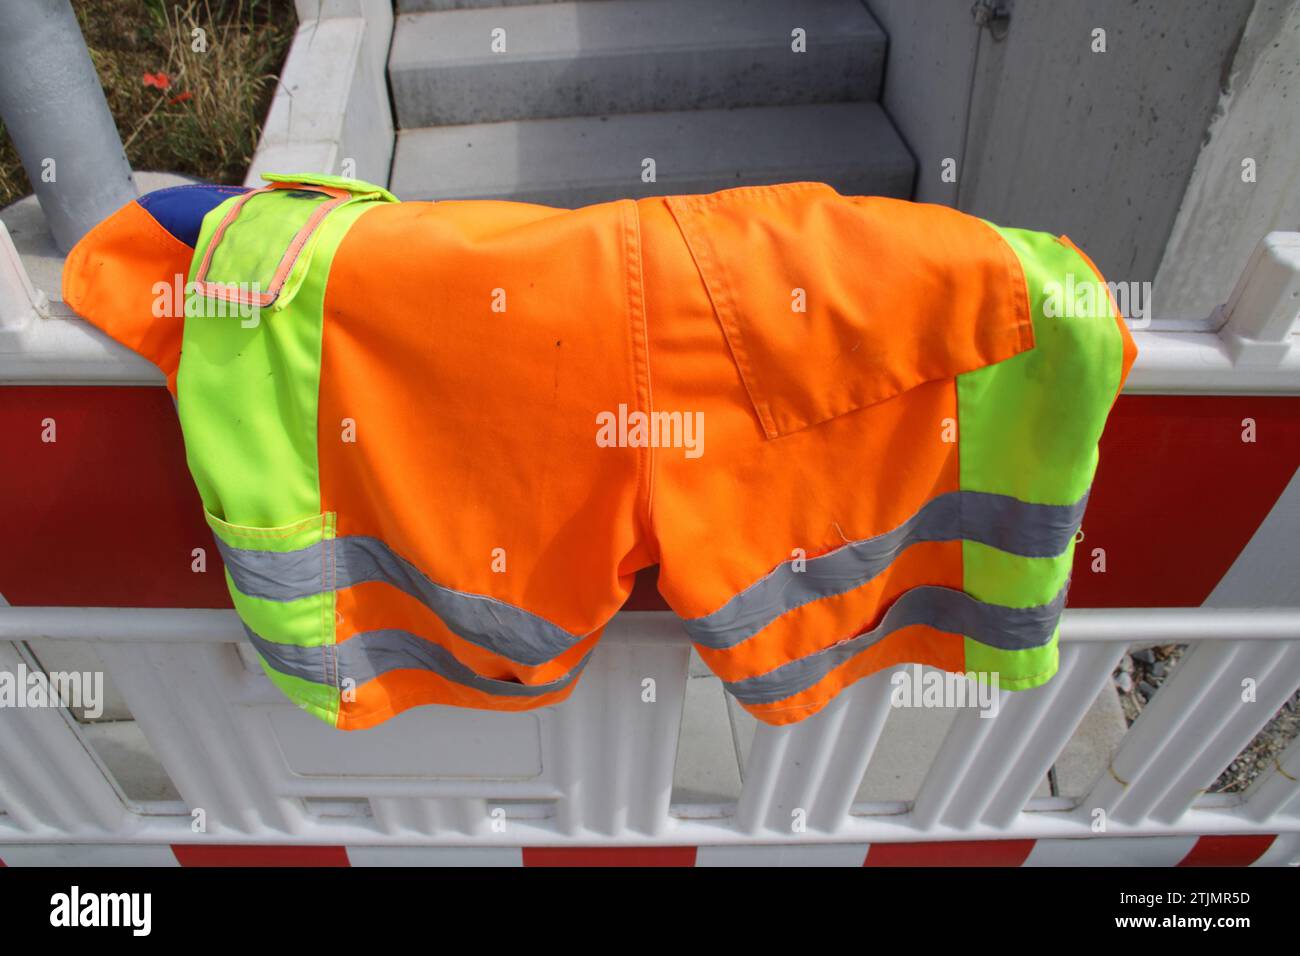 Short work trousers hang over a warning barrier to dry Stock Photo